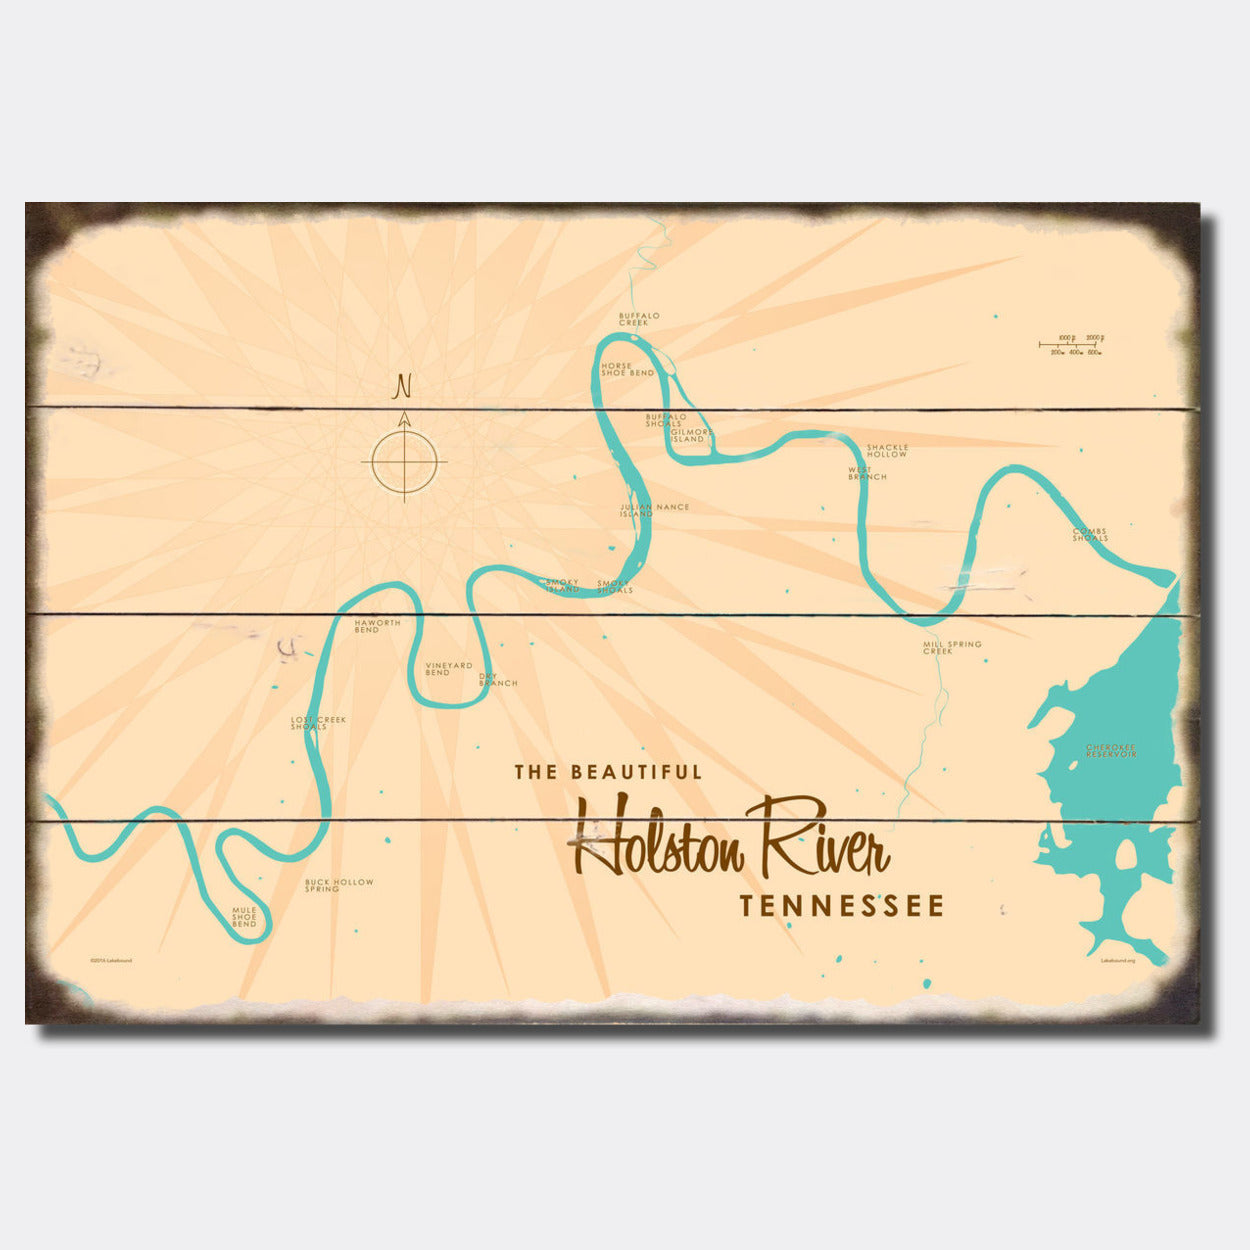 Holston River Tennessee, Sign Map Art